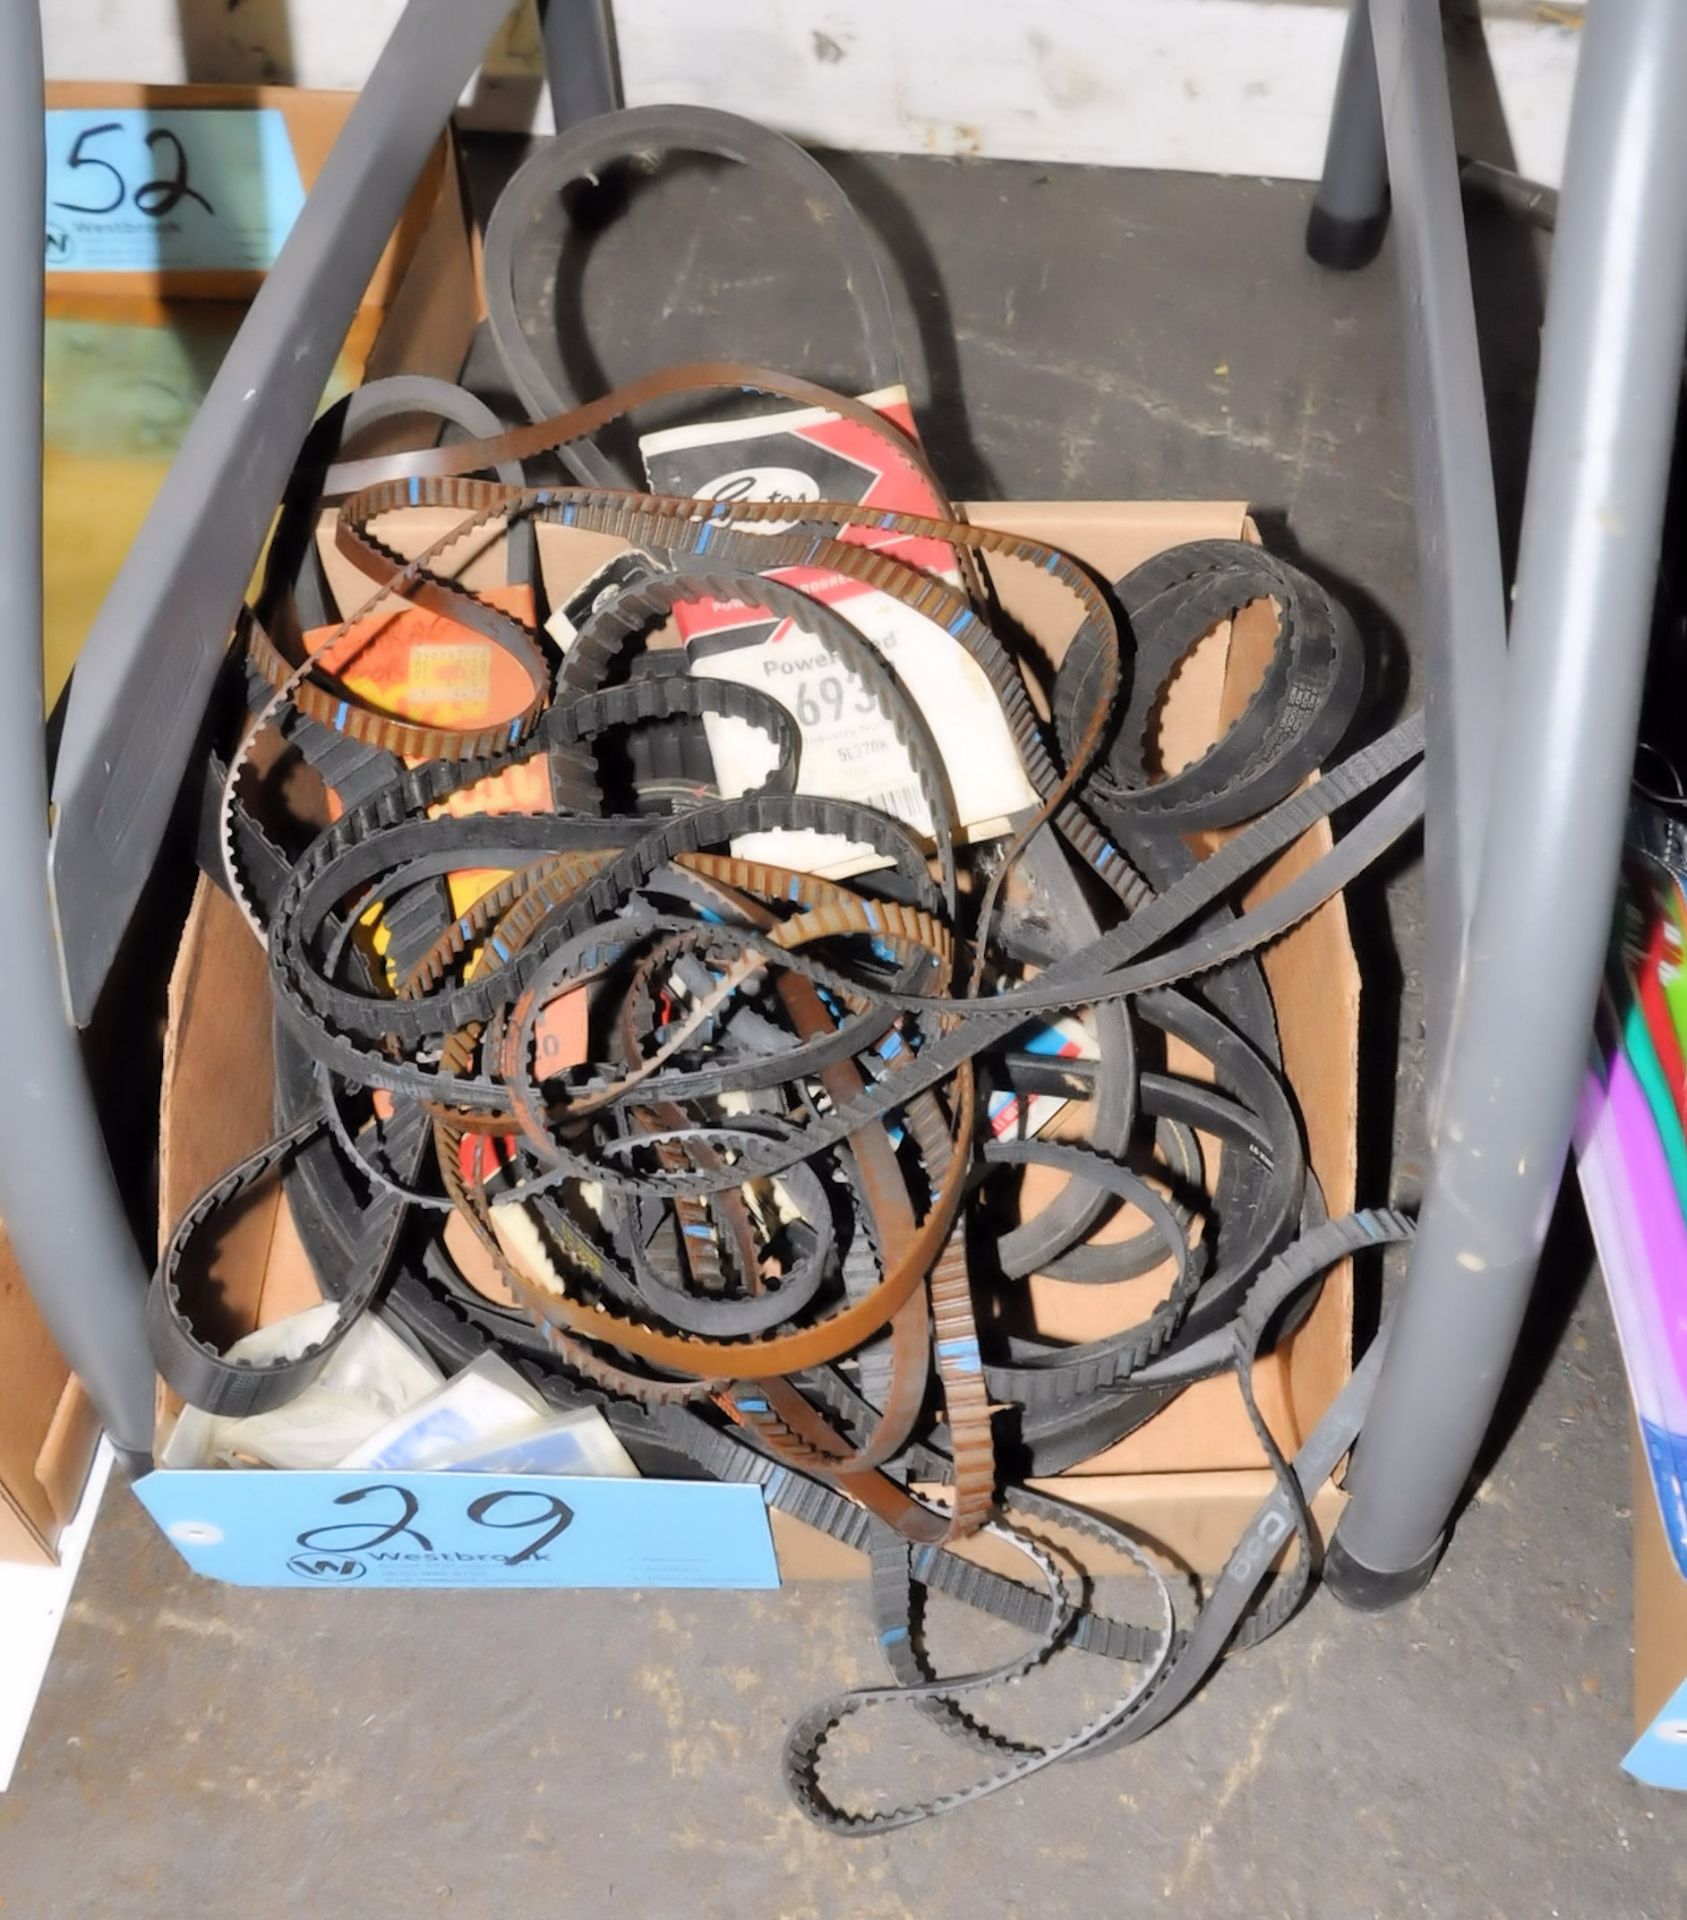 Lot-Various Drive Belts in (1) Box on Floor Under (1) Table